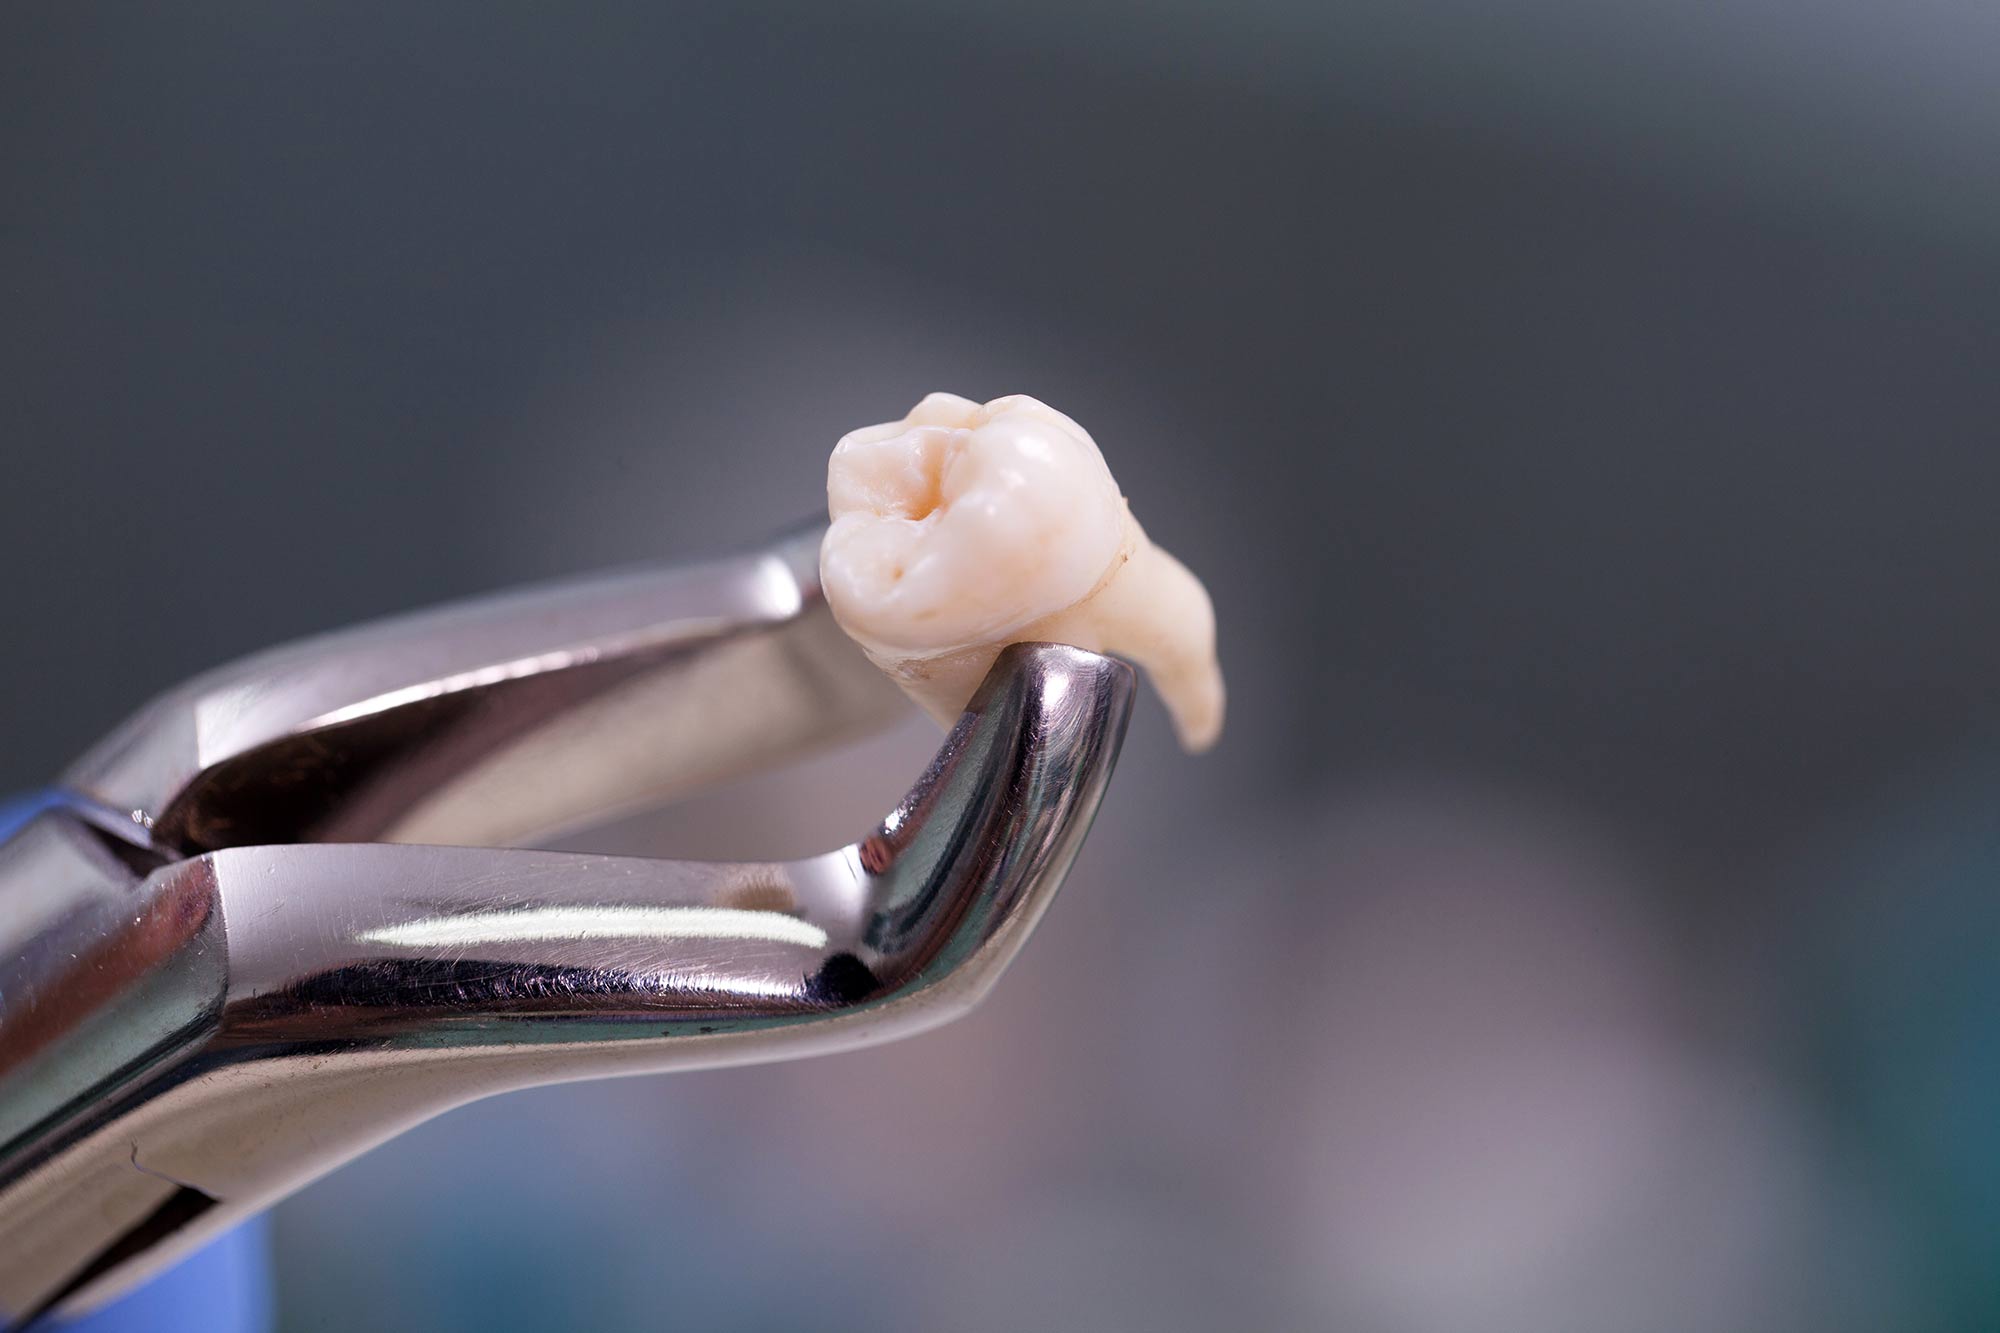 A tooth being held by an extraction tool.